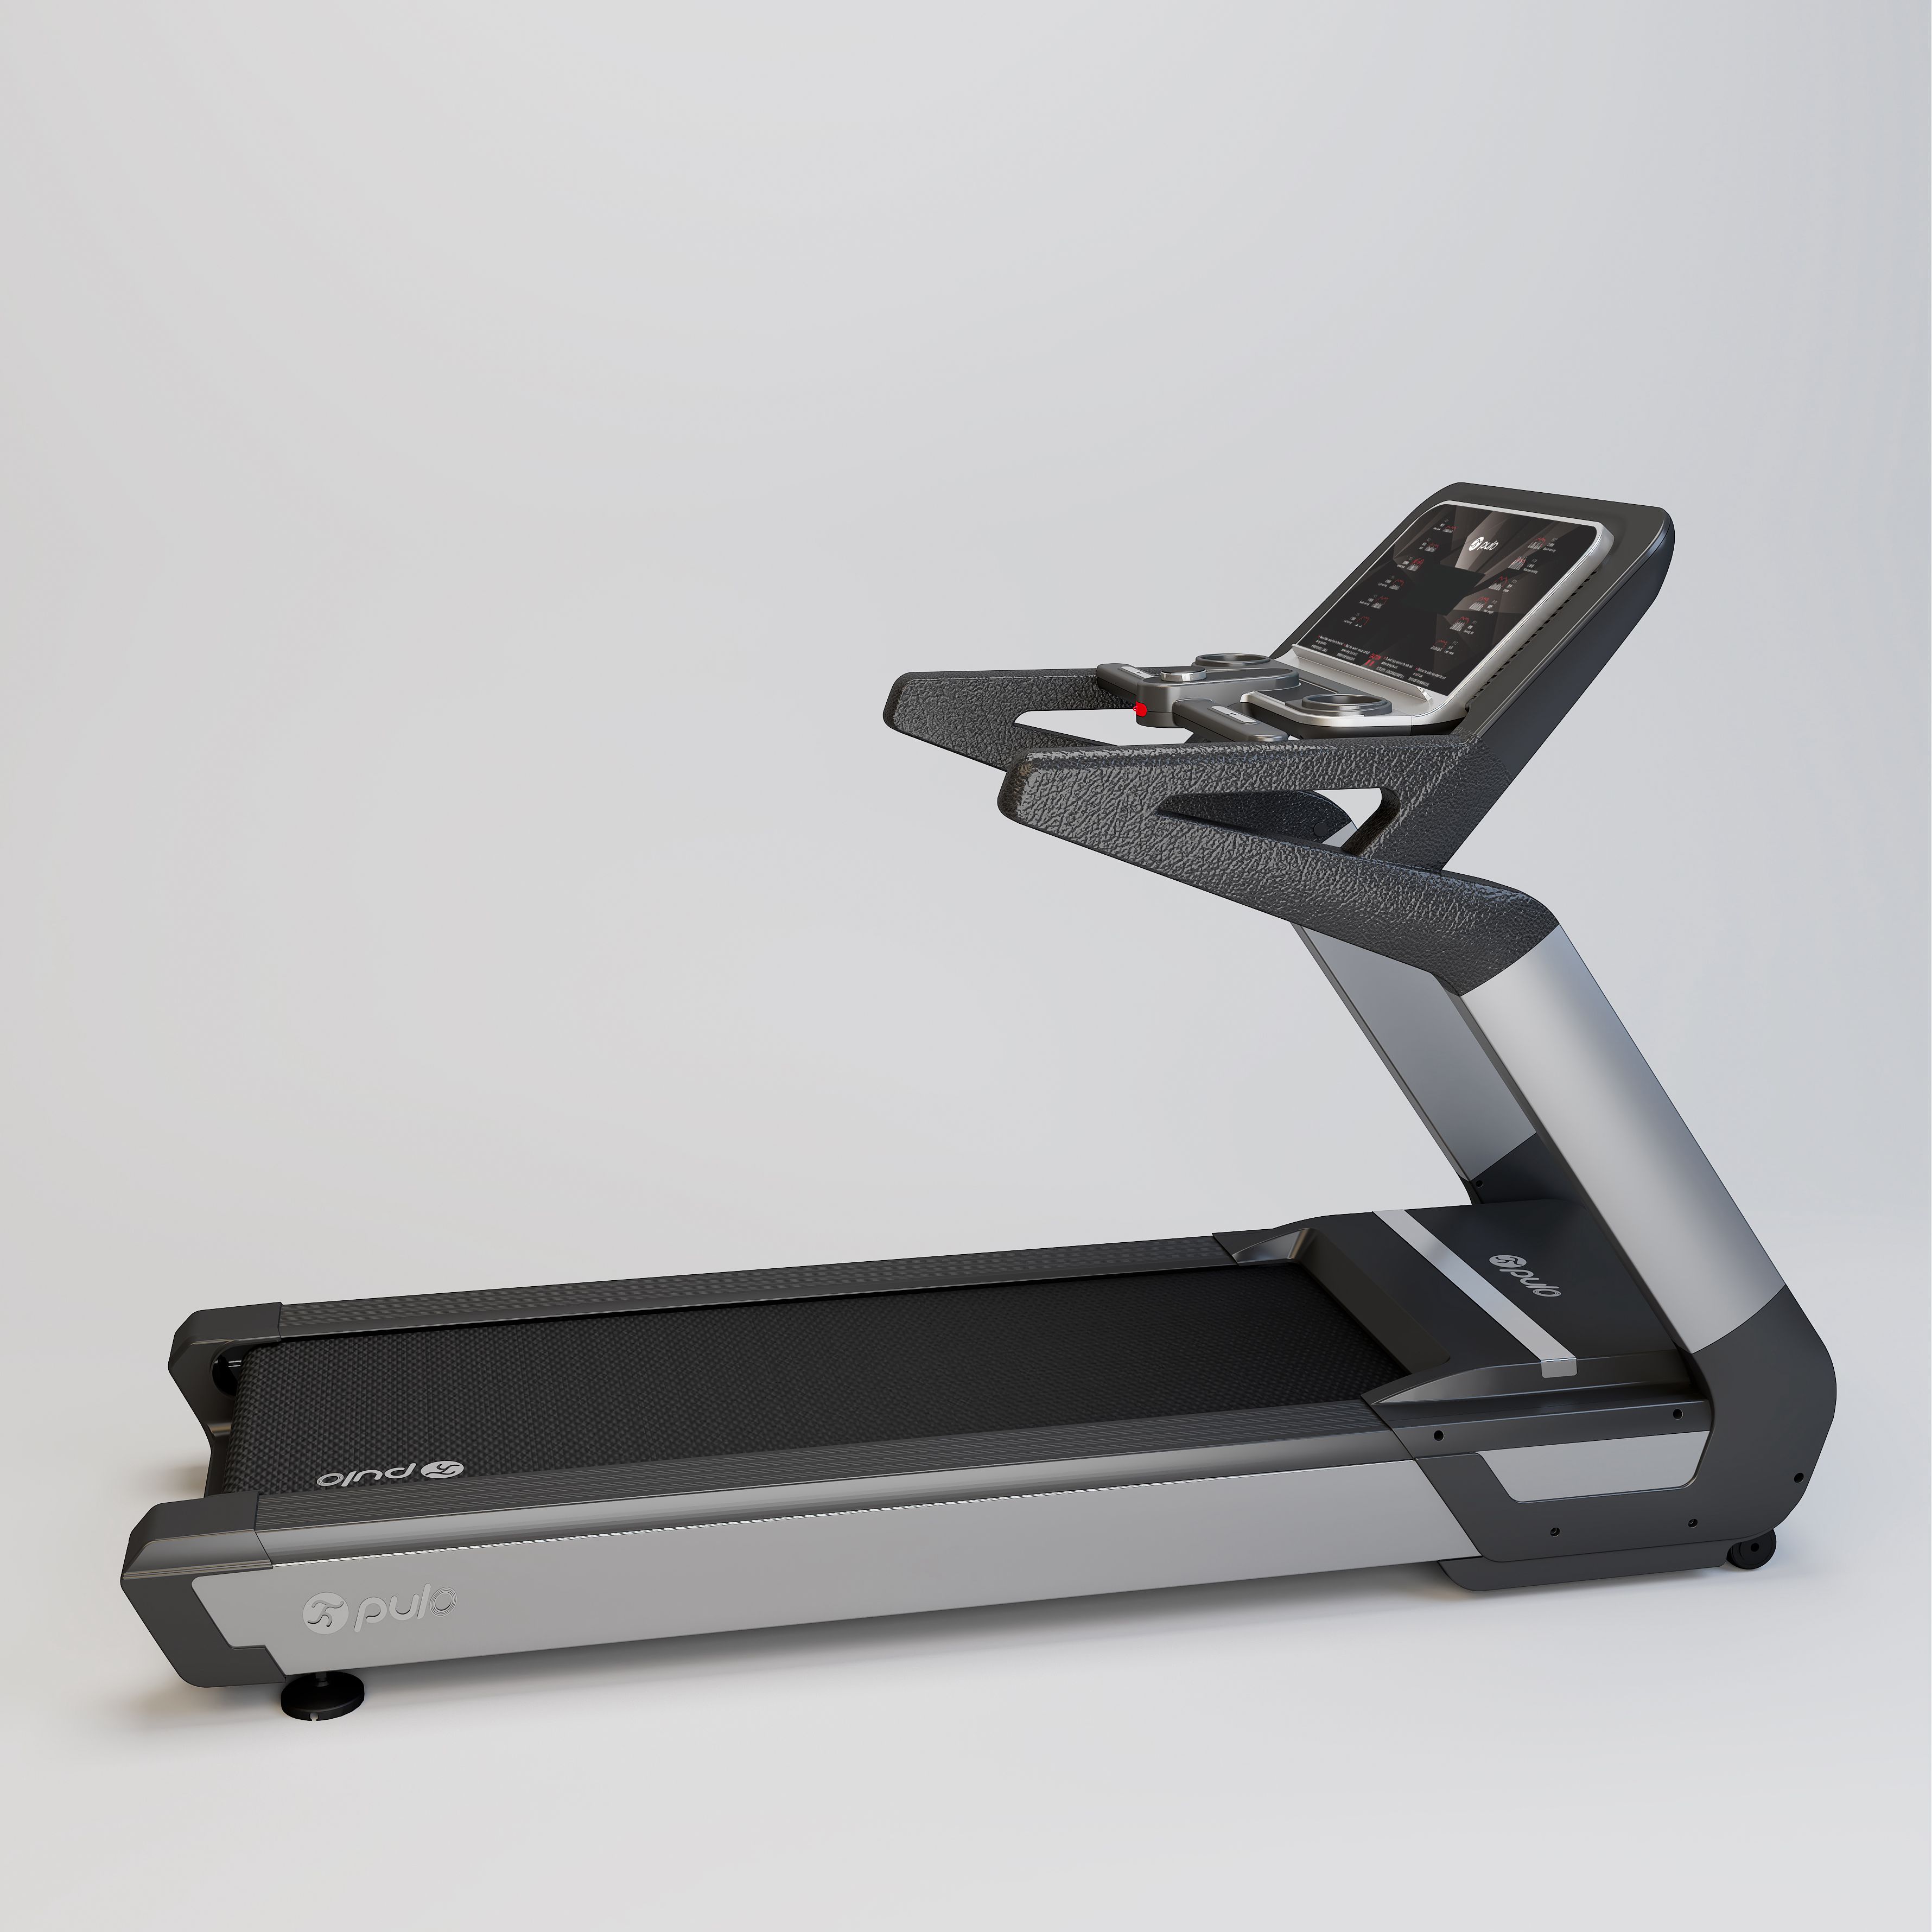 China Wholesale Best Treadmill Under 500 500 Manufacturers Suppliers - PX01T560-L Gym Fitness Equipment Running Machine Commercial Grade Treadmill 2.5HP Motor With LCD Screen and 560 Belt Size  – Puluo